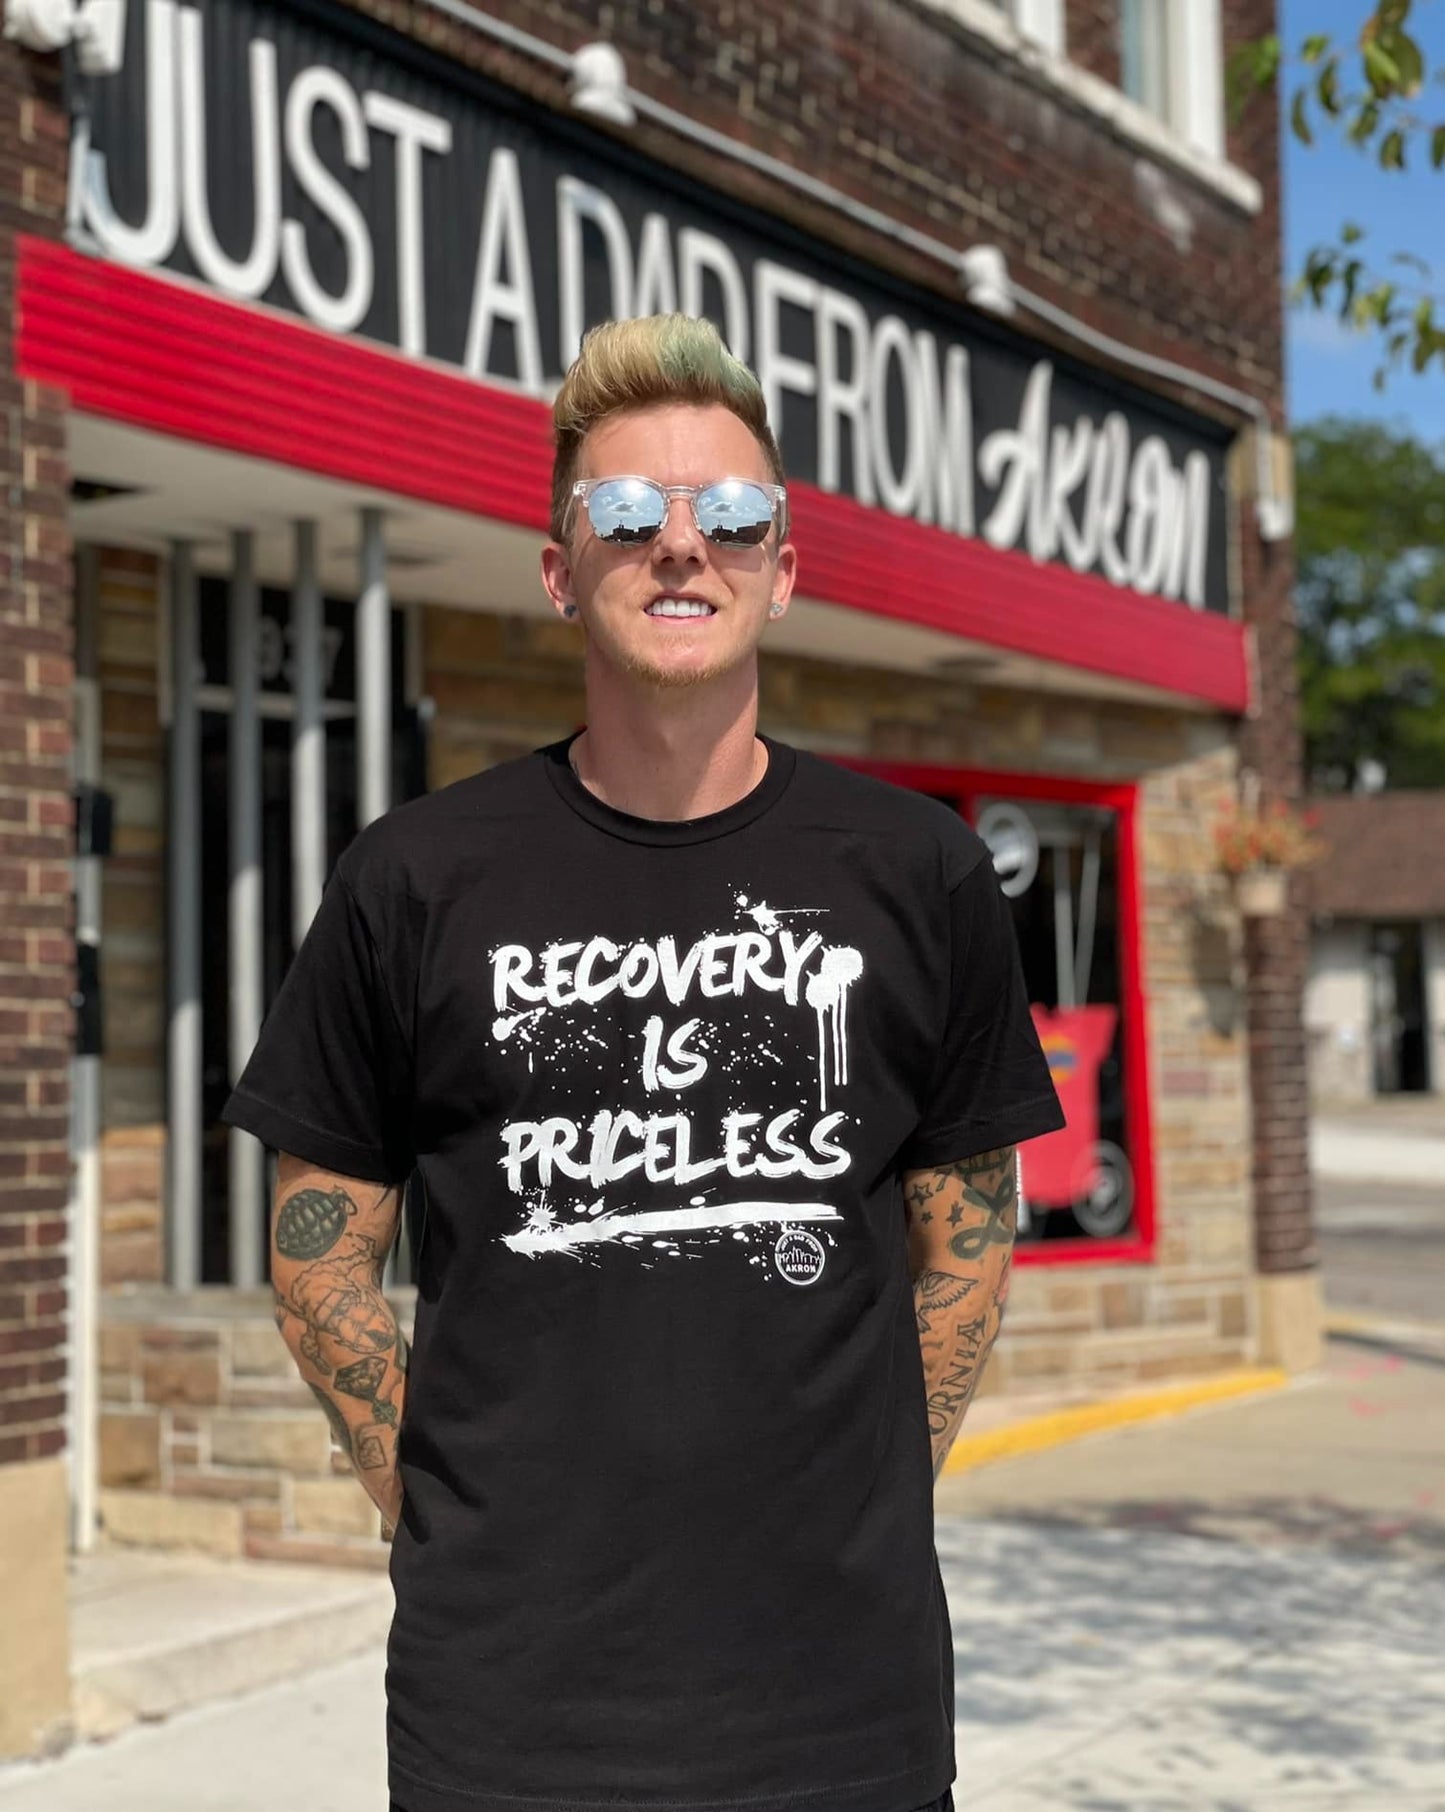 Recovery is Priceless – justadadfromakron